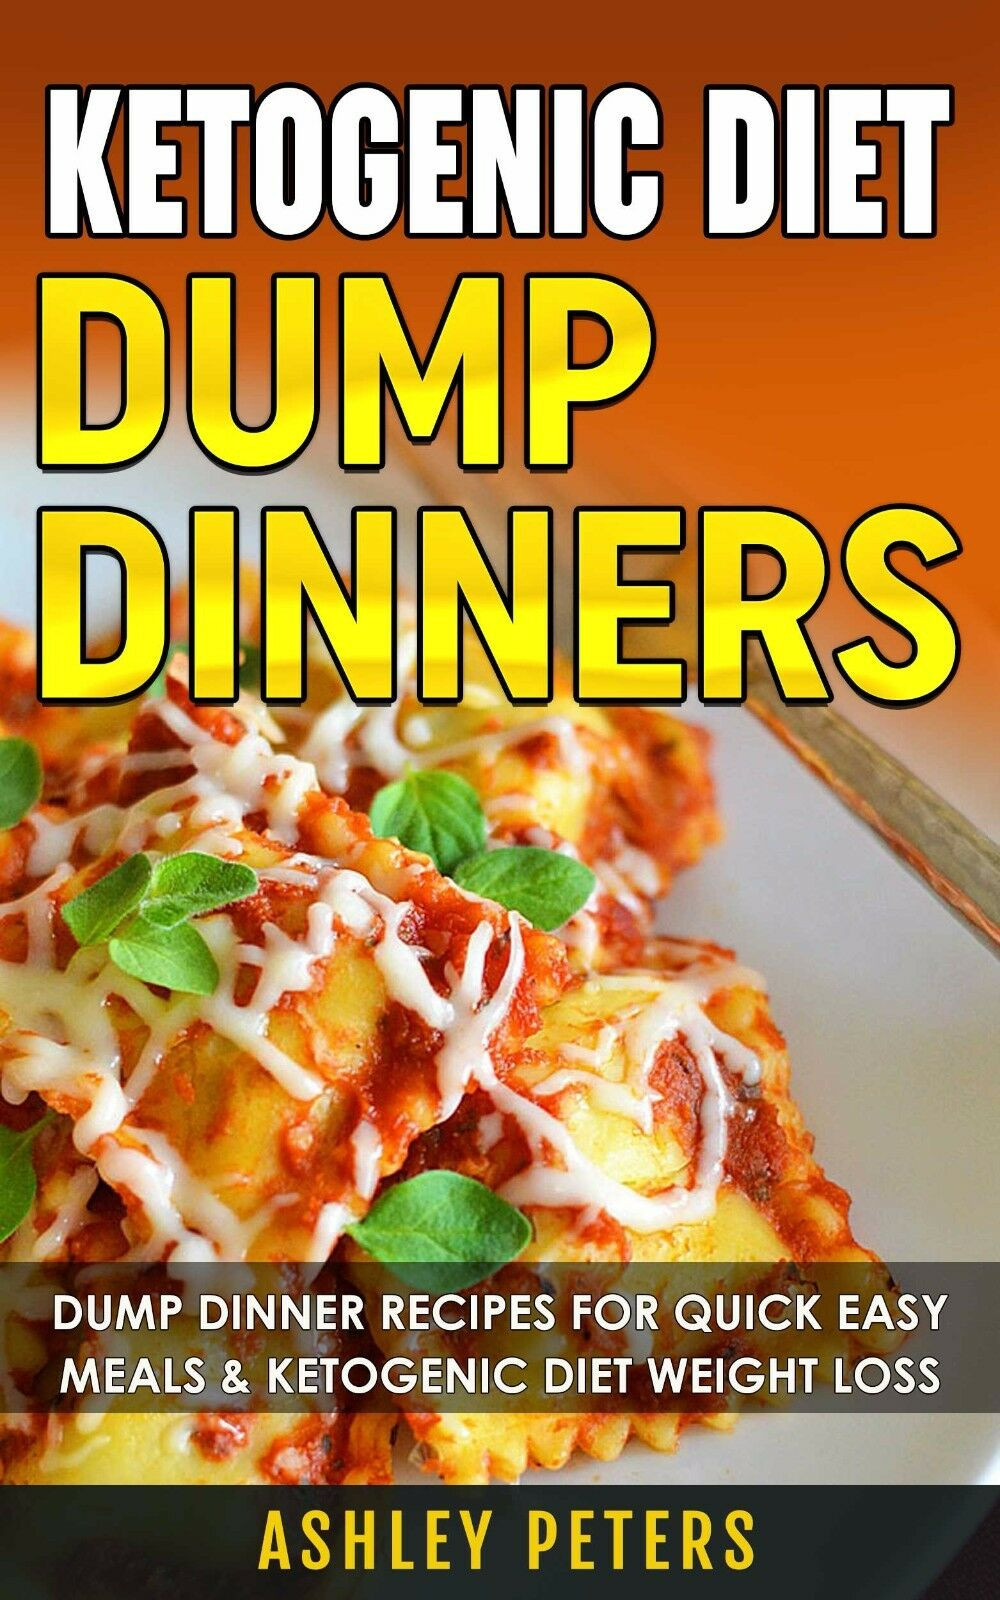 Keto Diet Recipes Dinners Easy
 Ketogenic Dump Diner Recipes 75 Quick and Easy Dump